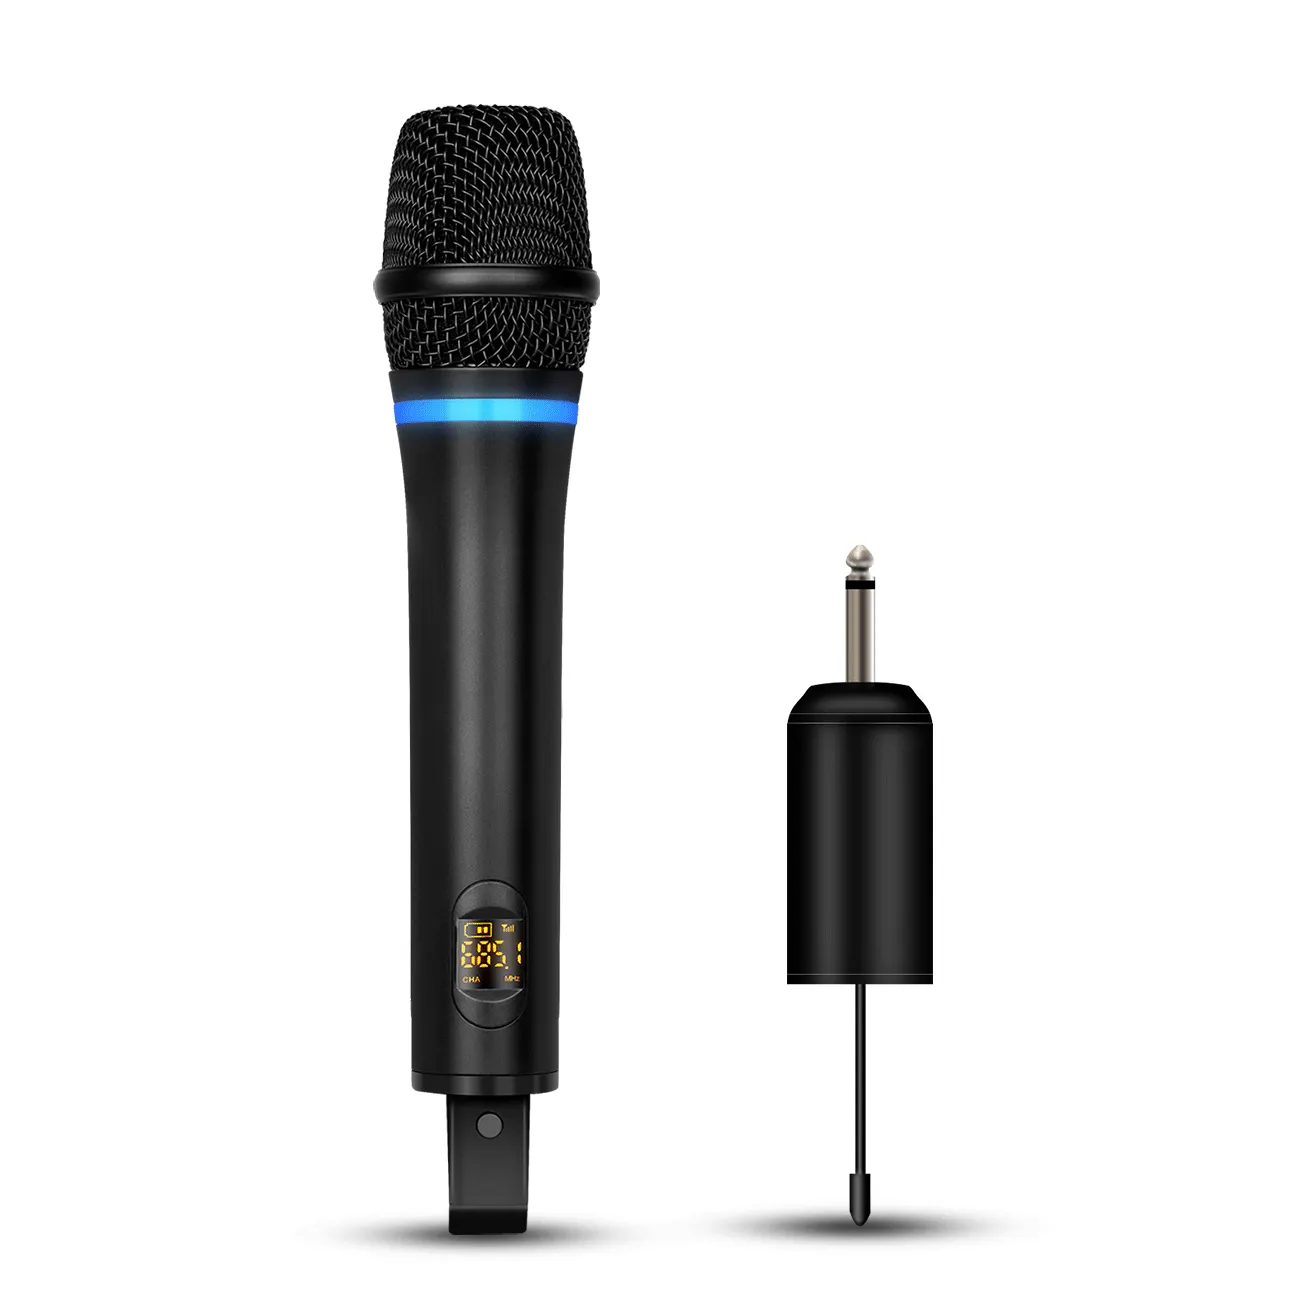 Biner W7 Professional Noise Cancelling UHF Wireless Karaoke Microphone With Rechargeable Microphone Wireless For Stage KTV